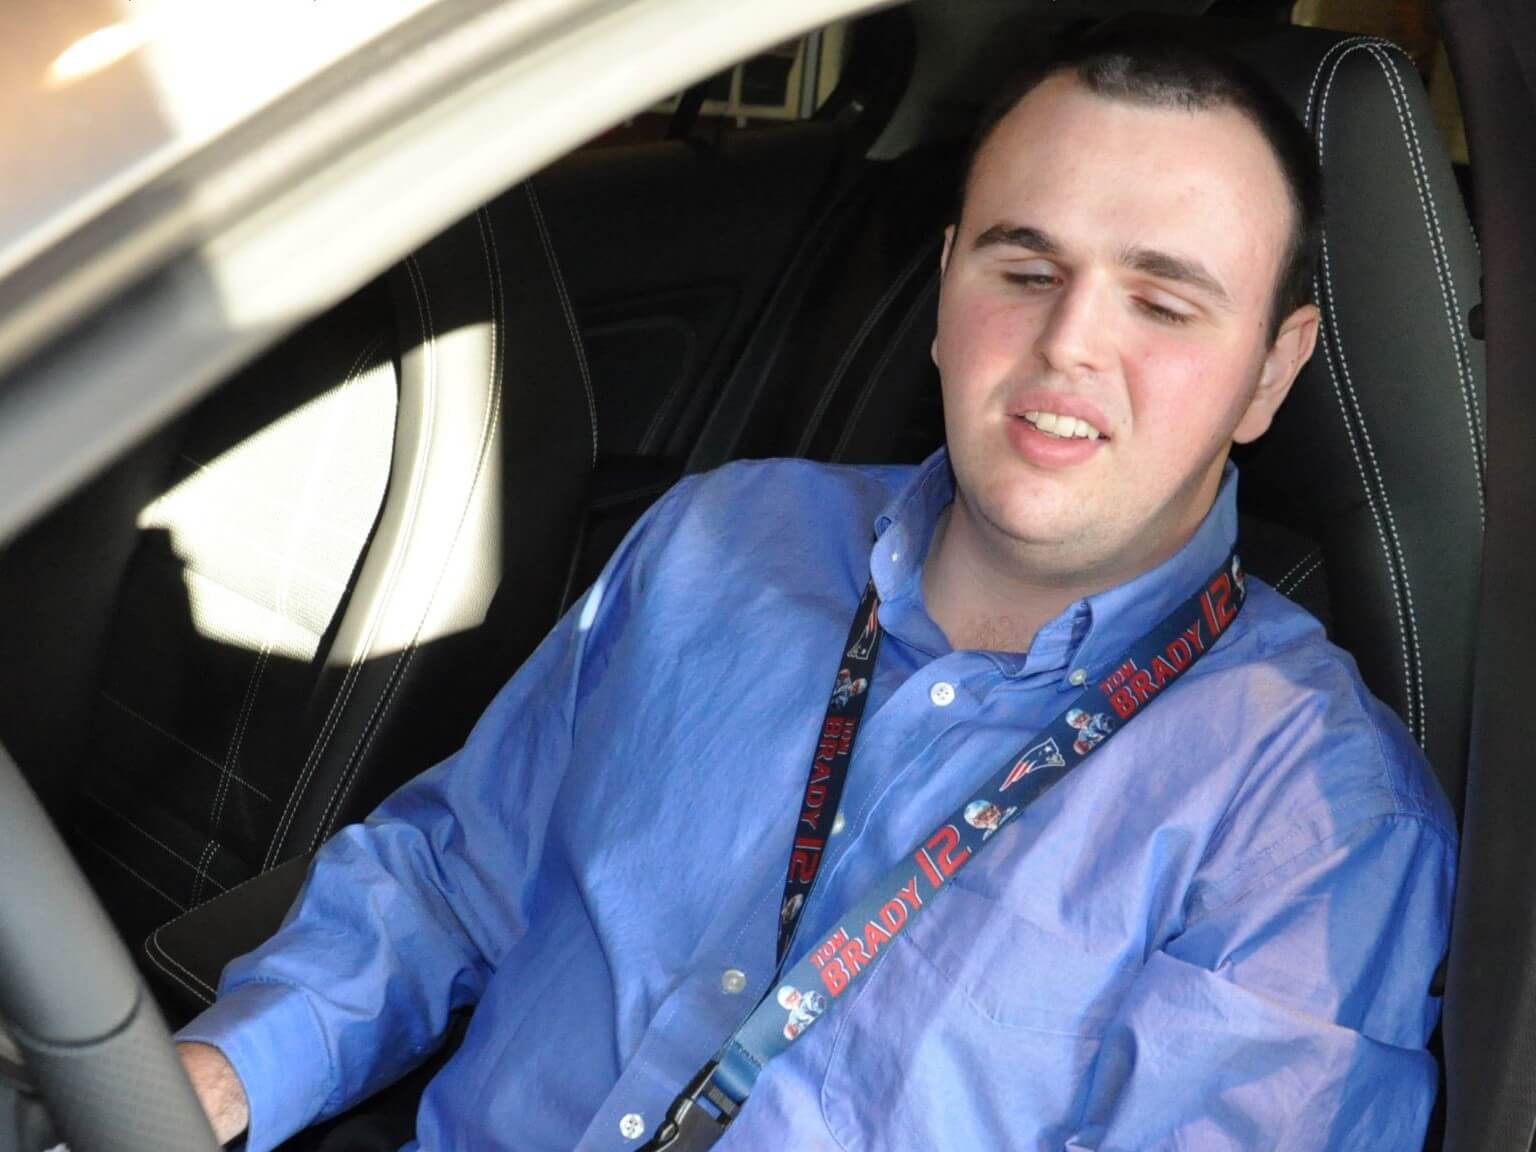 Adam Roberge, wearing a blue button down shirt with a Patriots lanyard around his neck, smiles as he sits in the driver's seat of a Mercedes-Benz on his first day of work at the dealership.